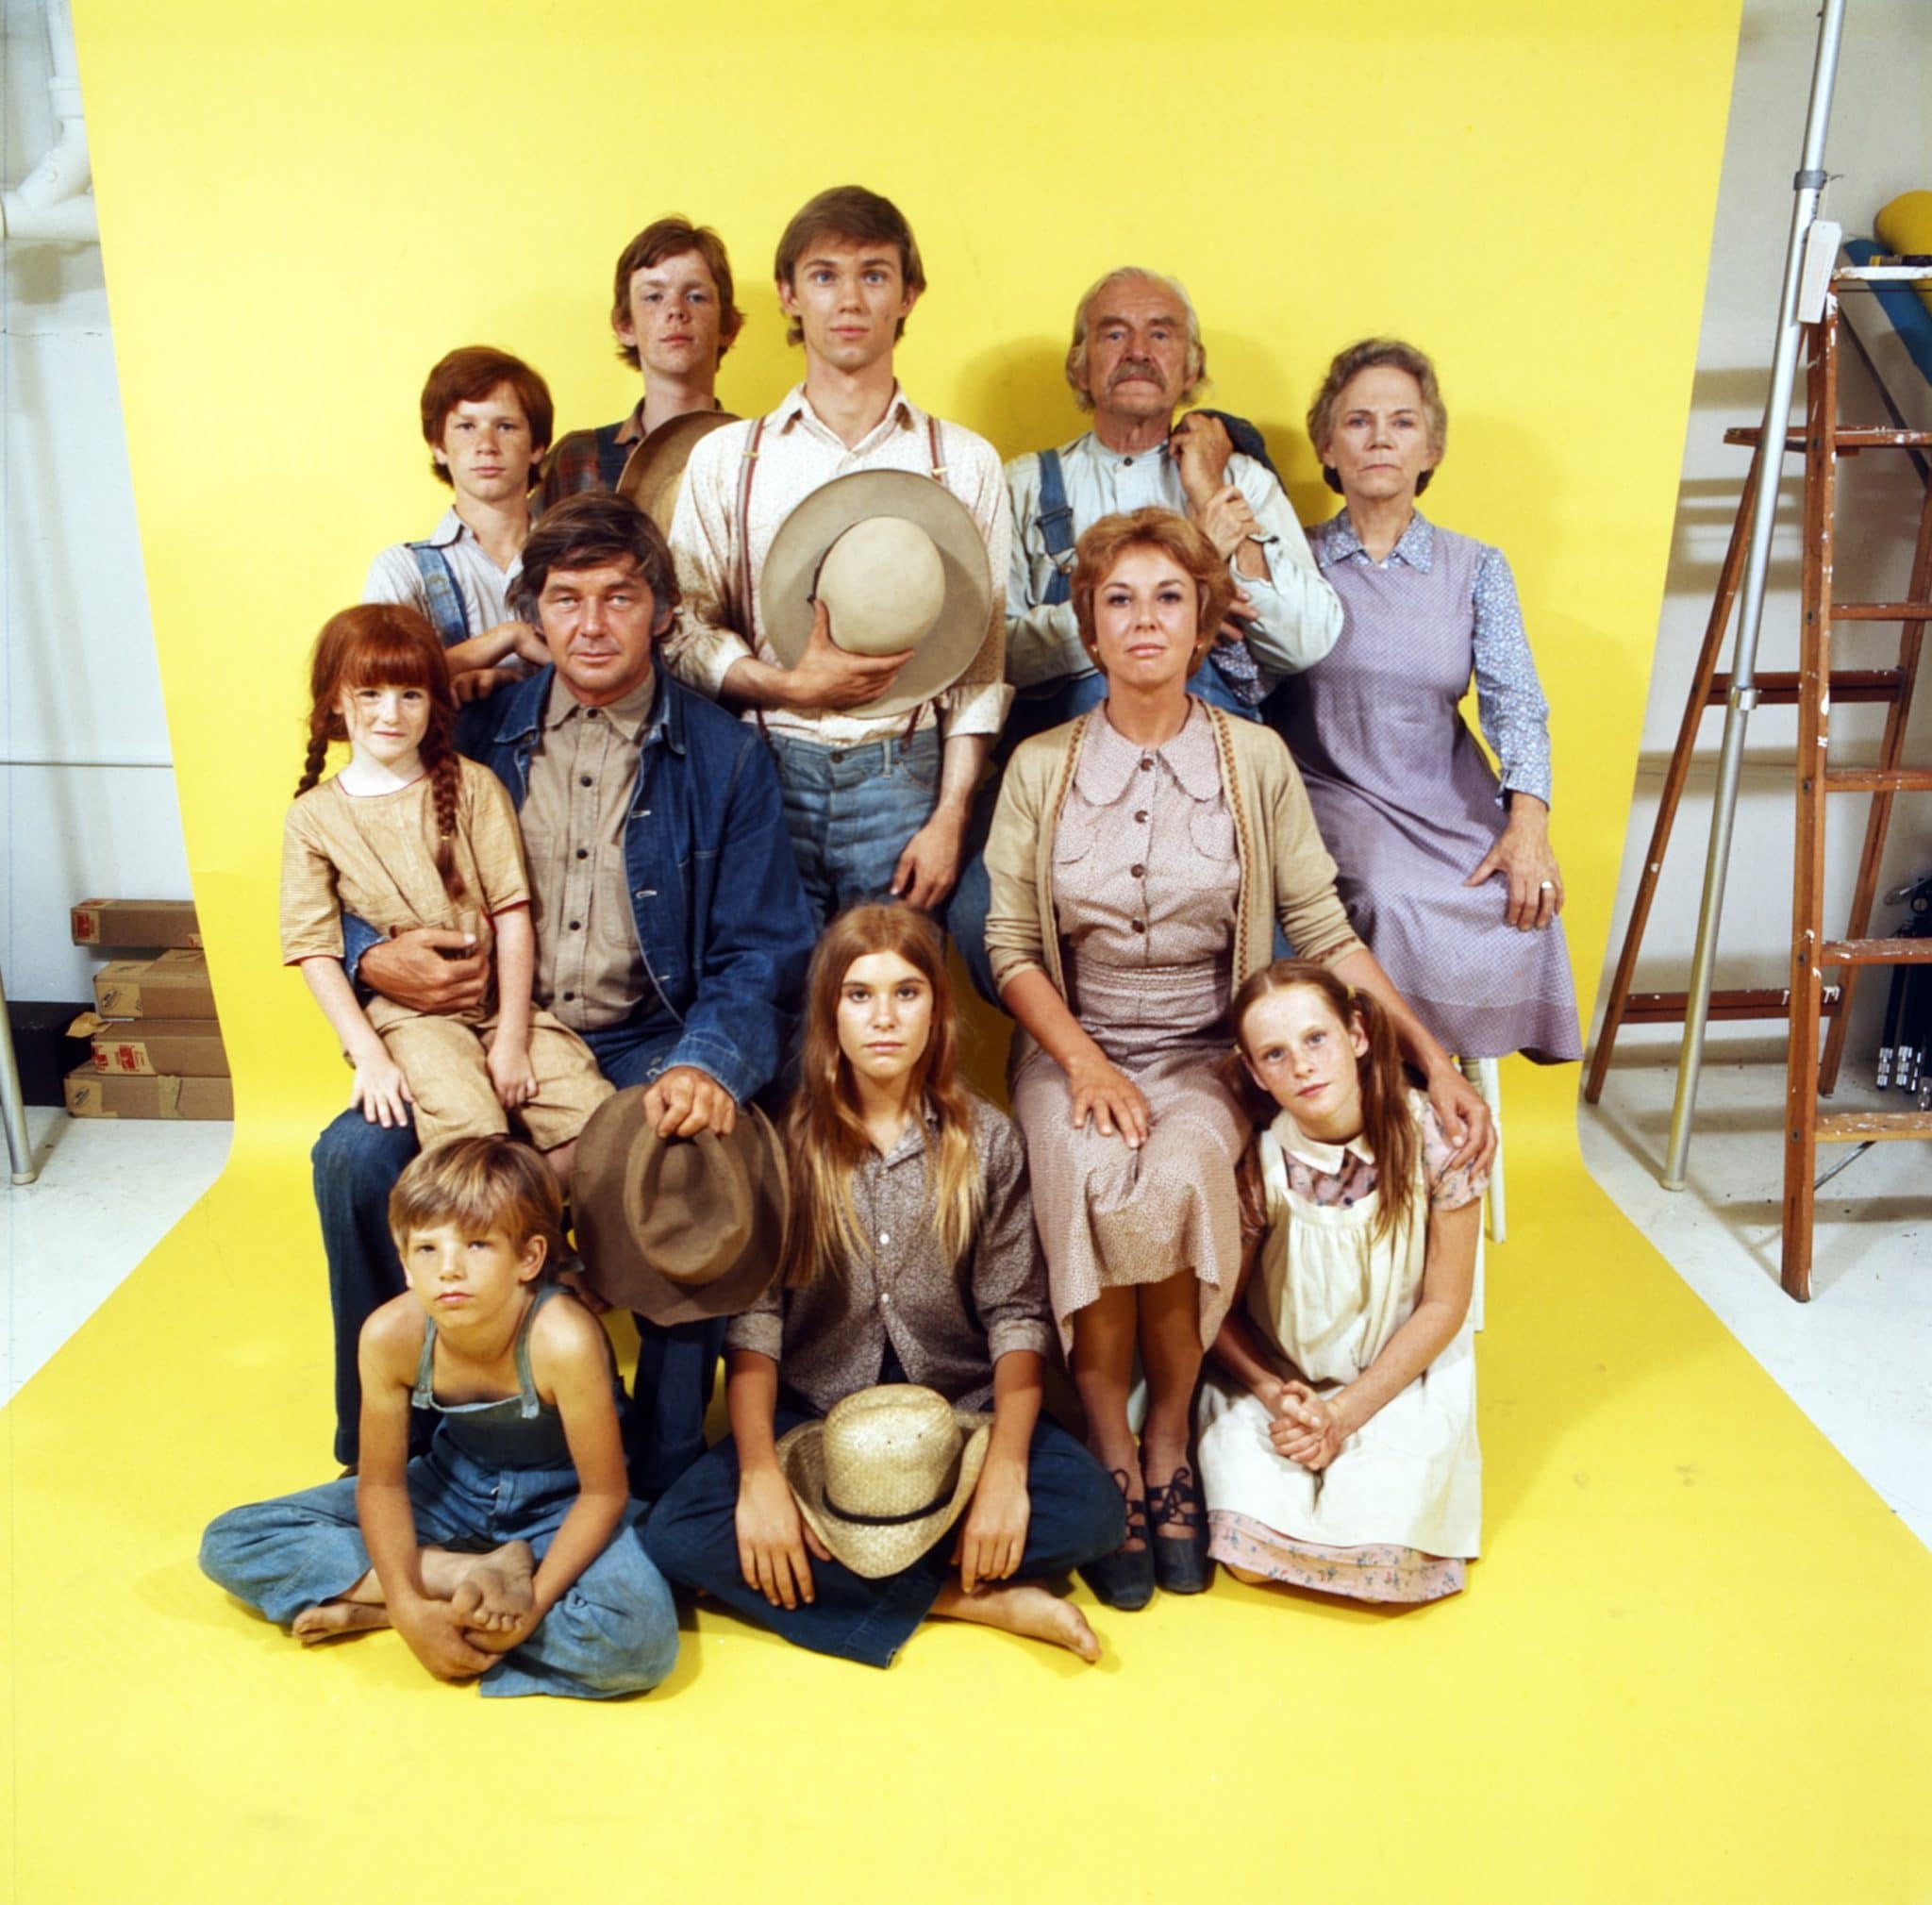 ‘The Waltons’ High Viewership Could Mean More To Come